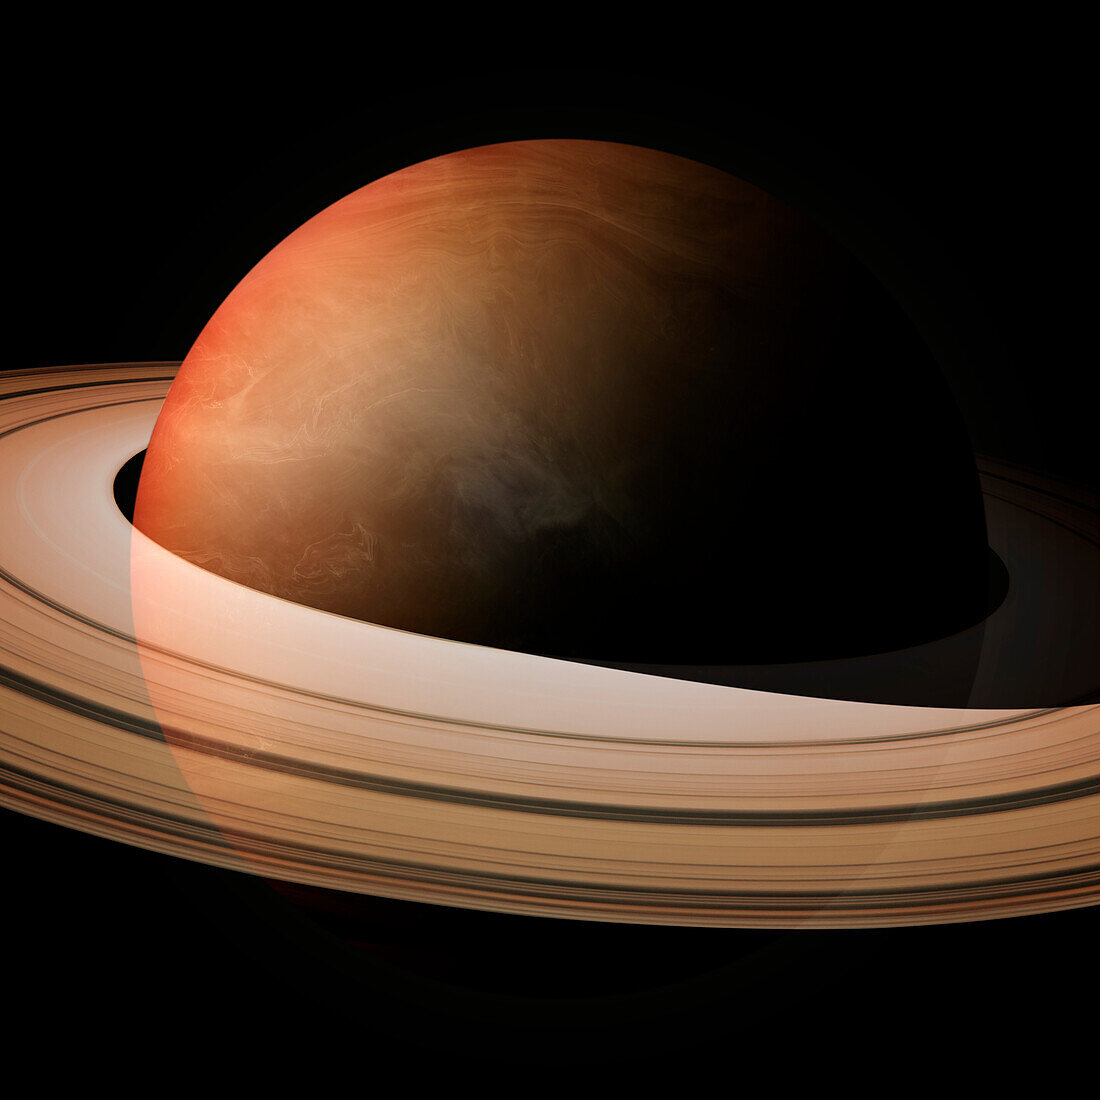 Exoplanet gas giant with rings, composite image